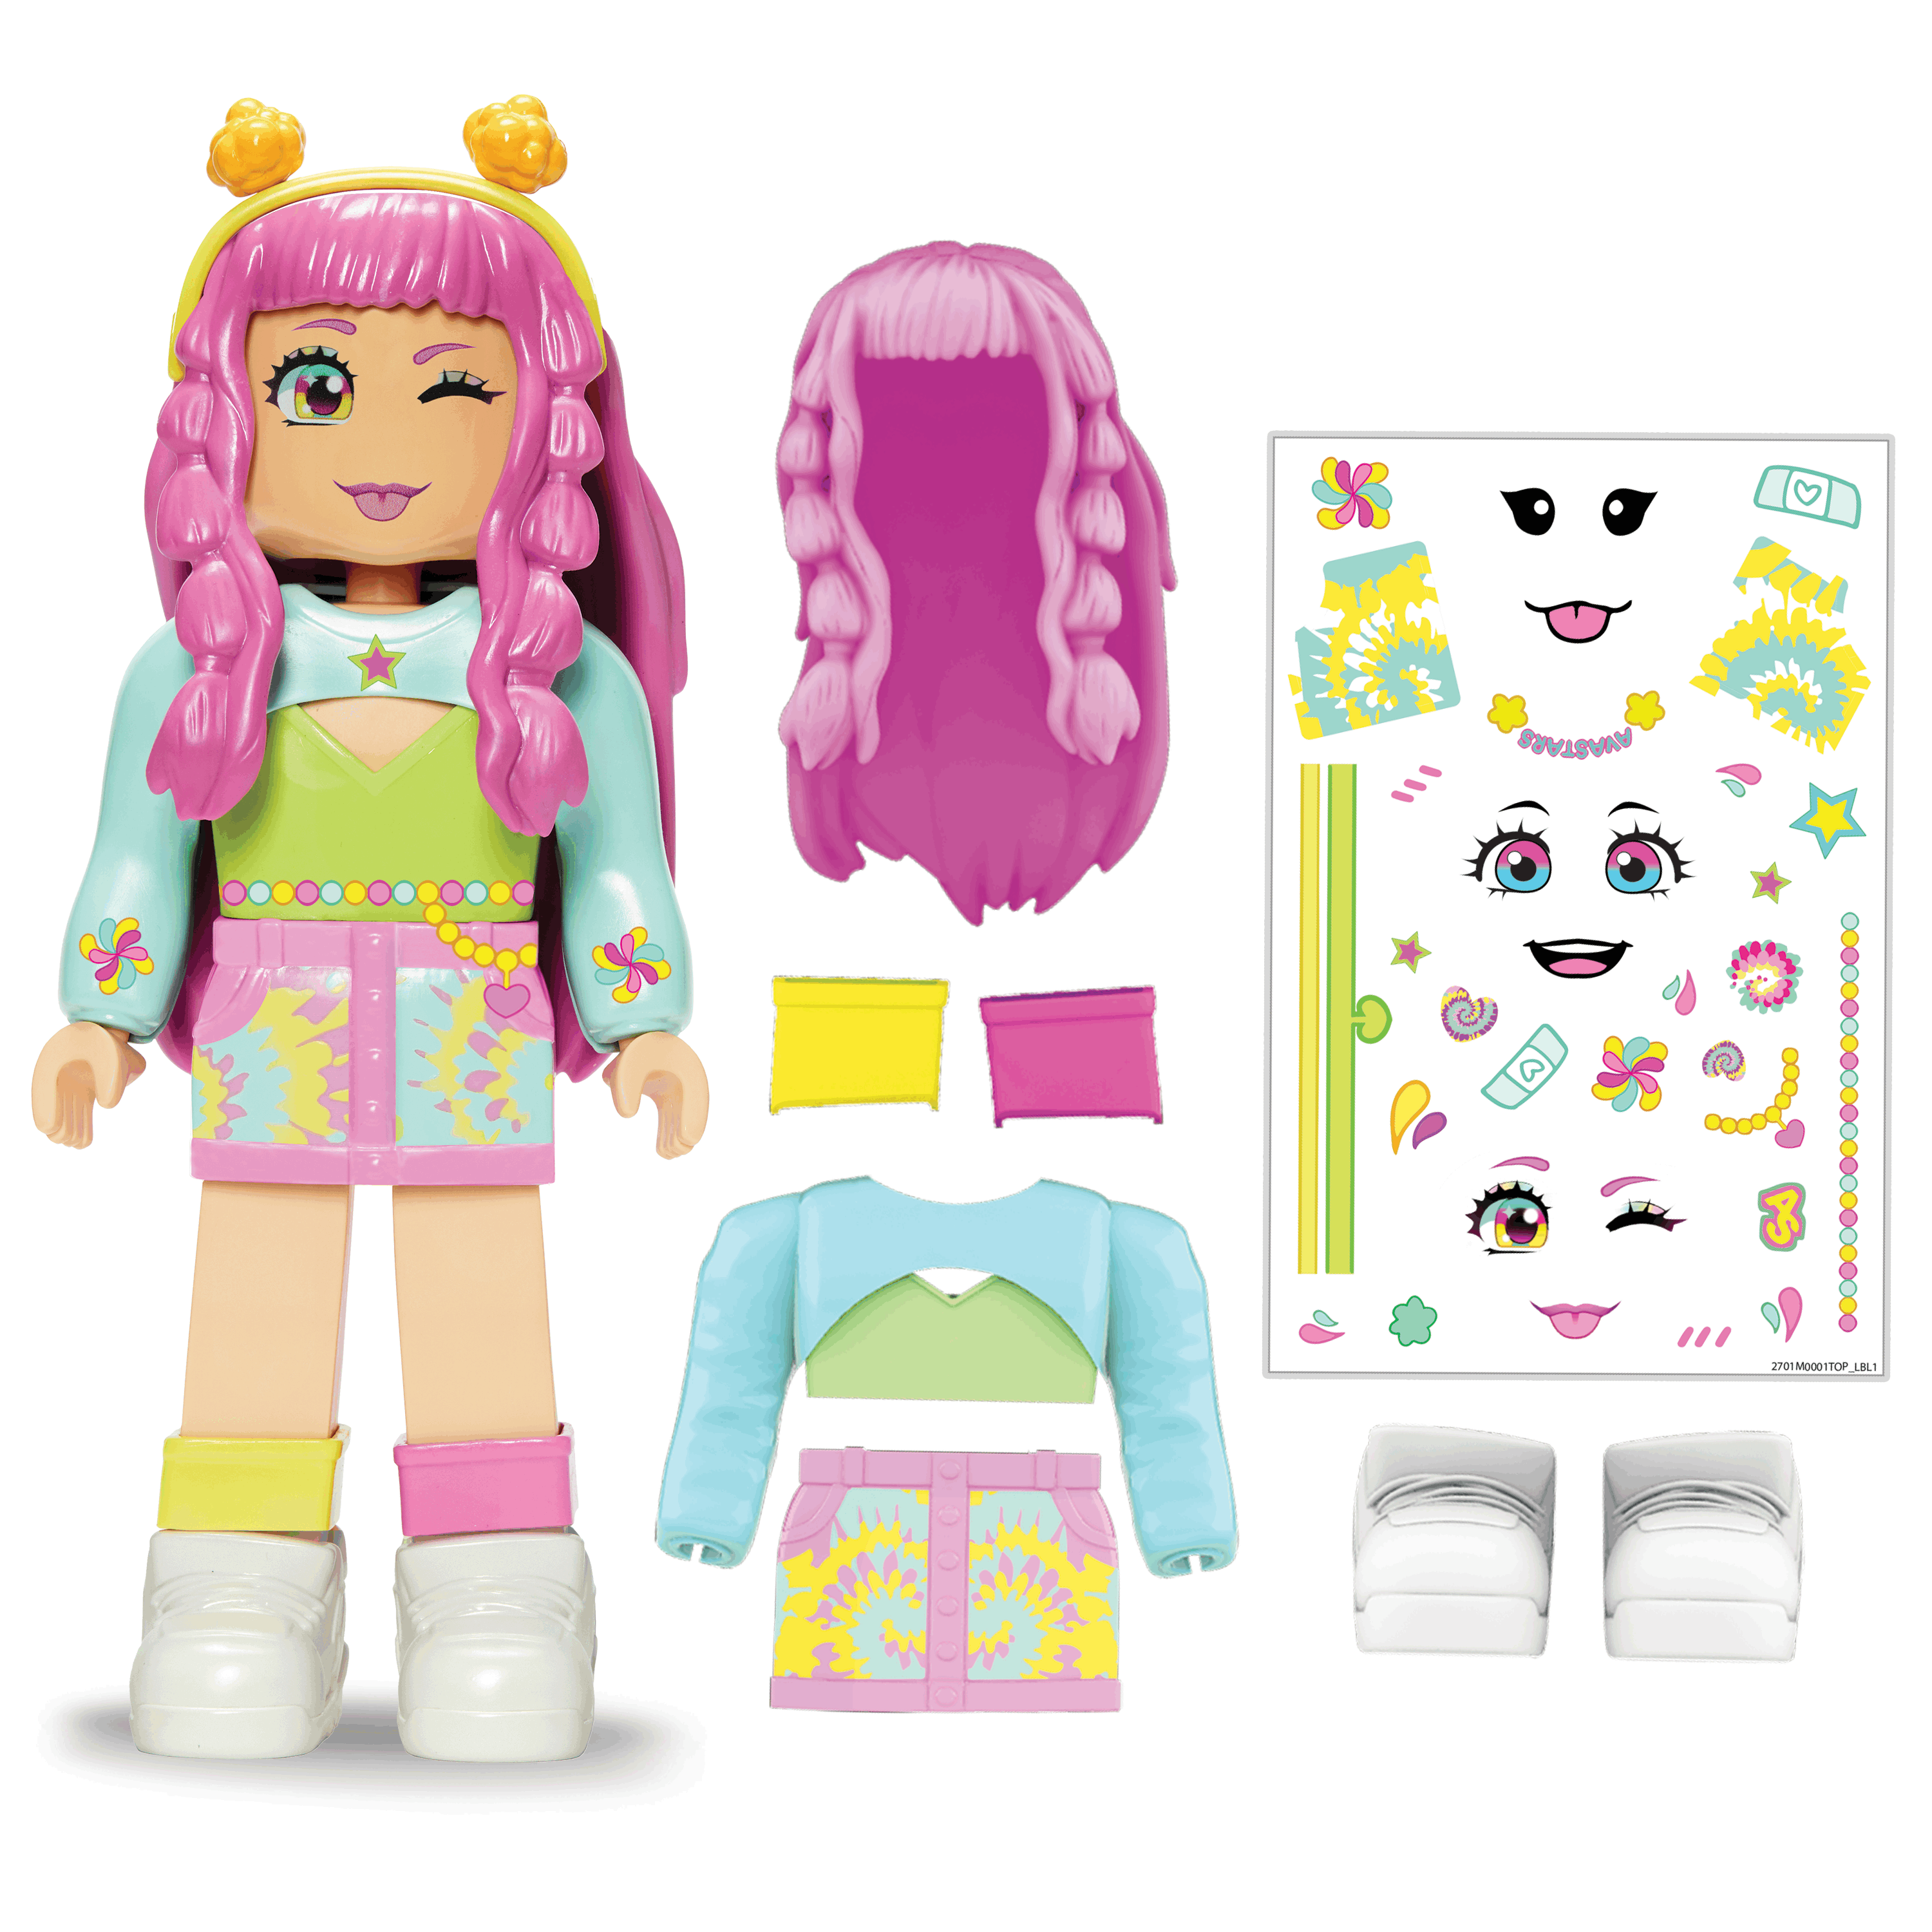 My Avastars Doll Line and 'Roblox' Game Bring the Metaverse to the Toy  Aisle - The Toy Insider